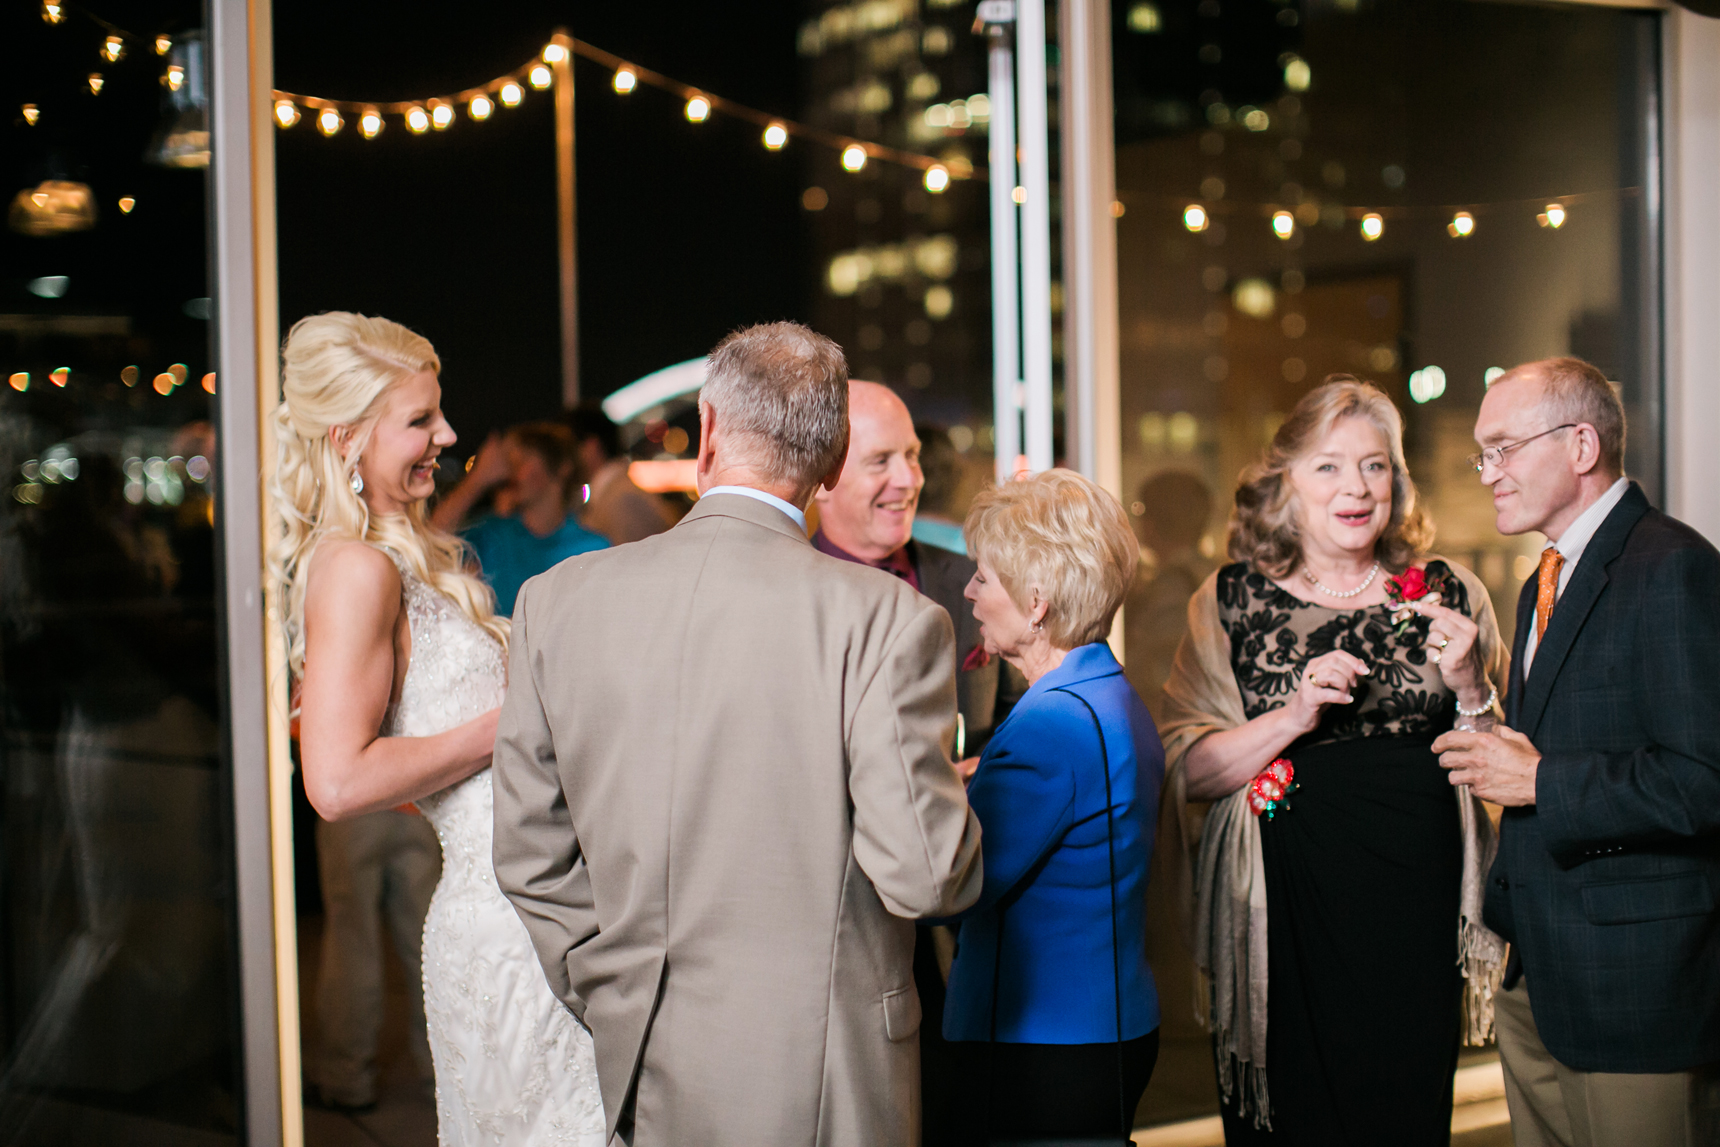 Bride mingling with guests